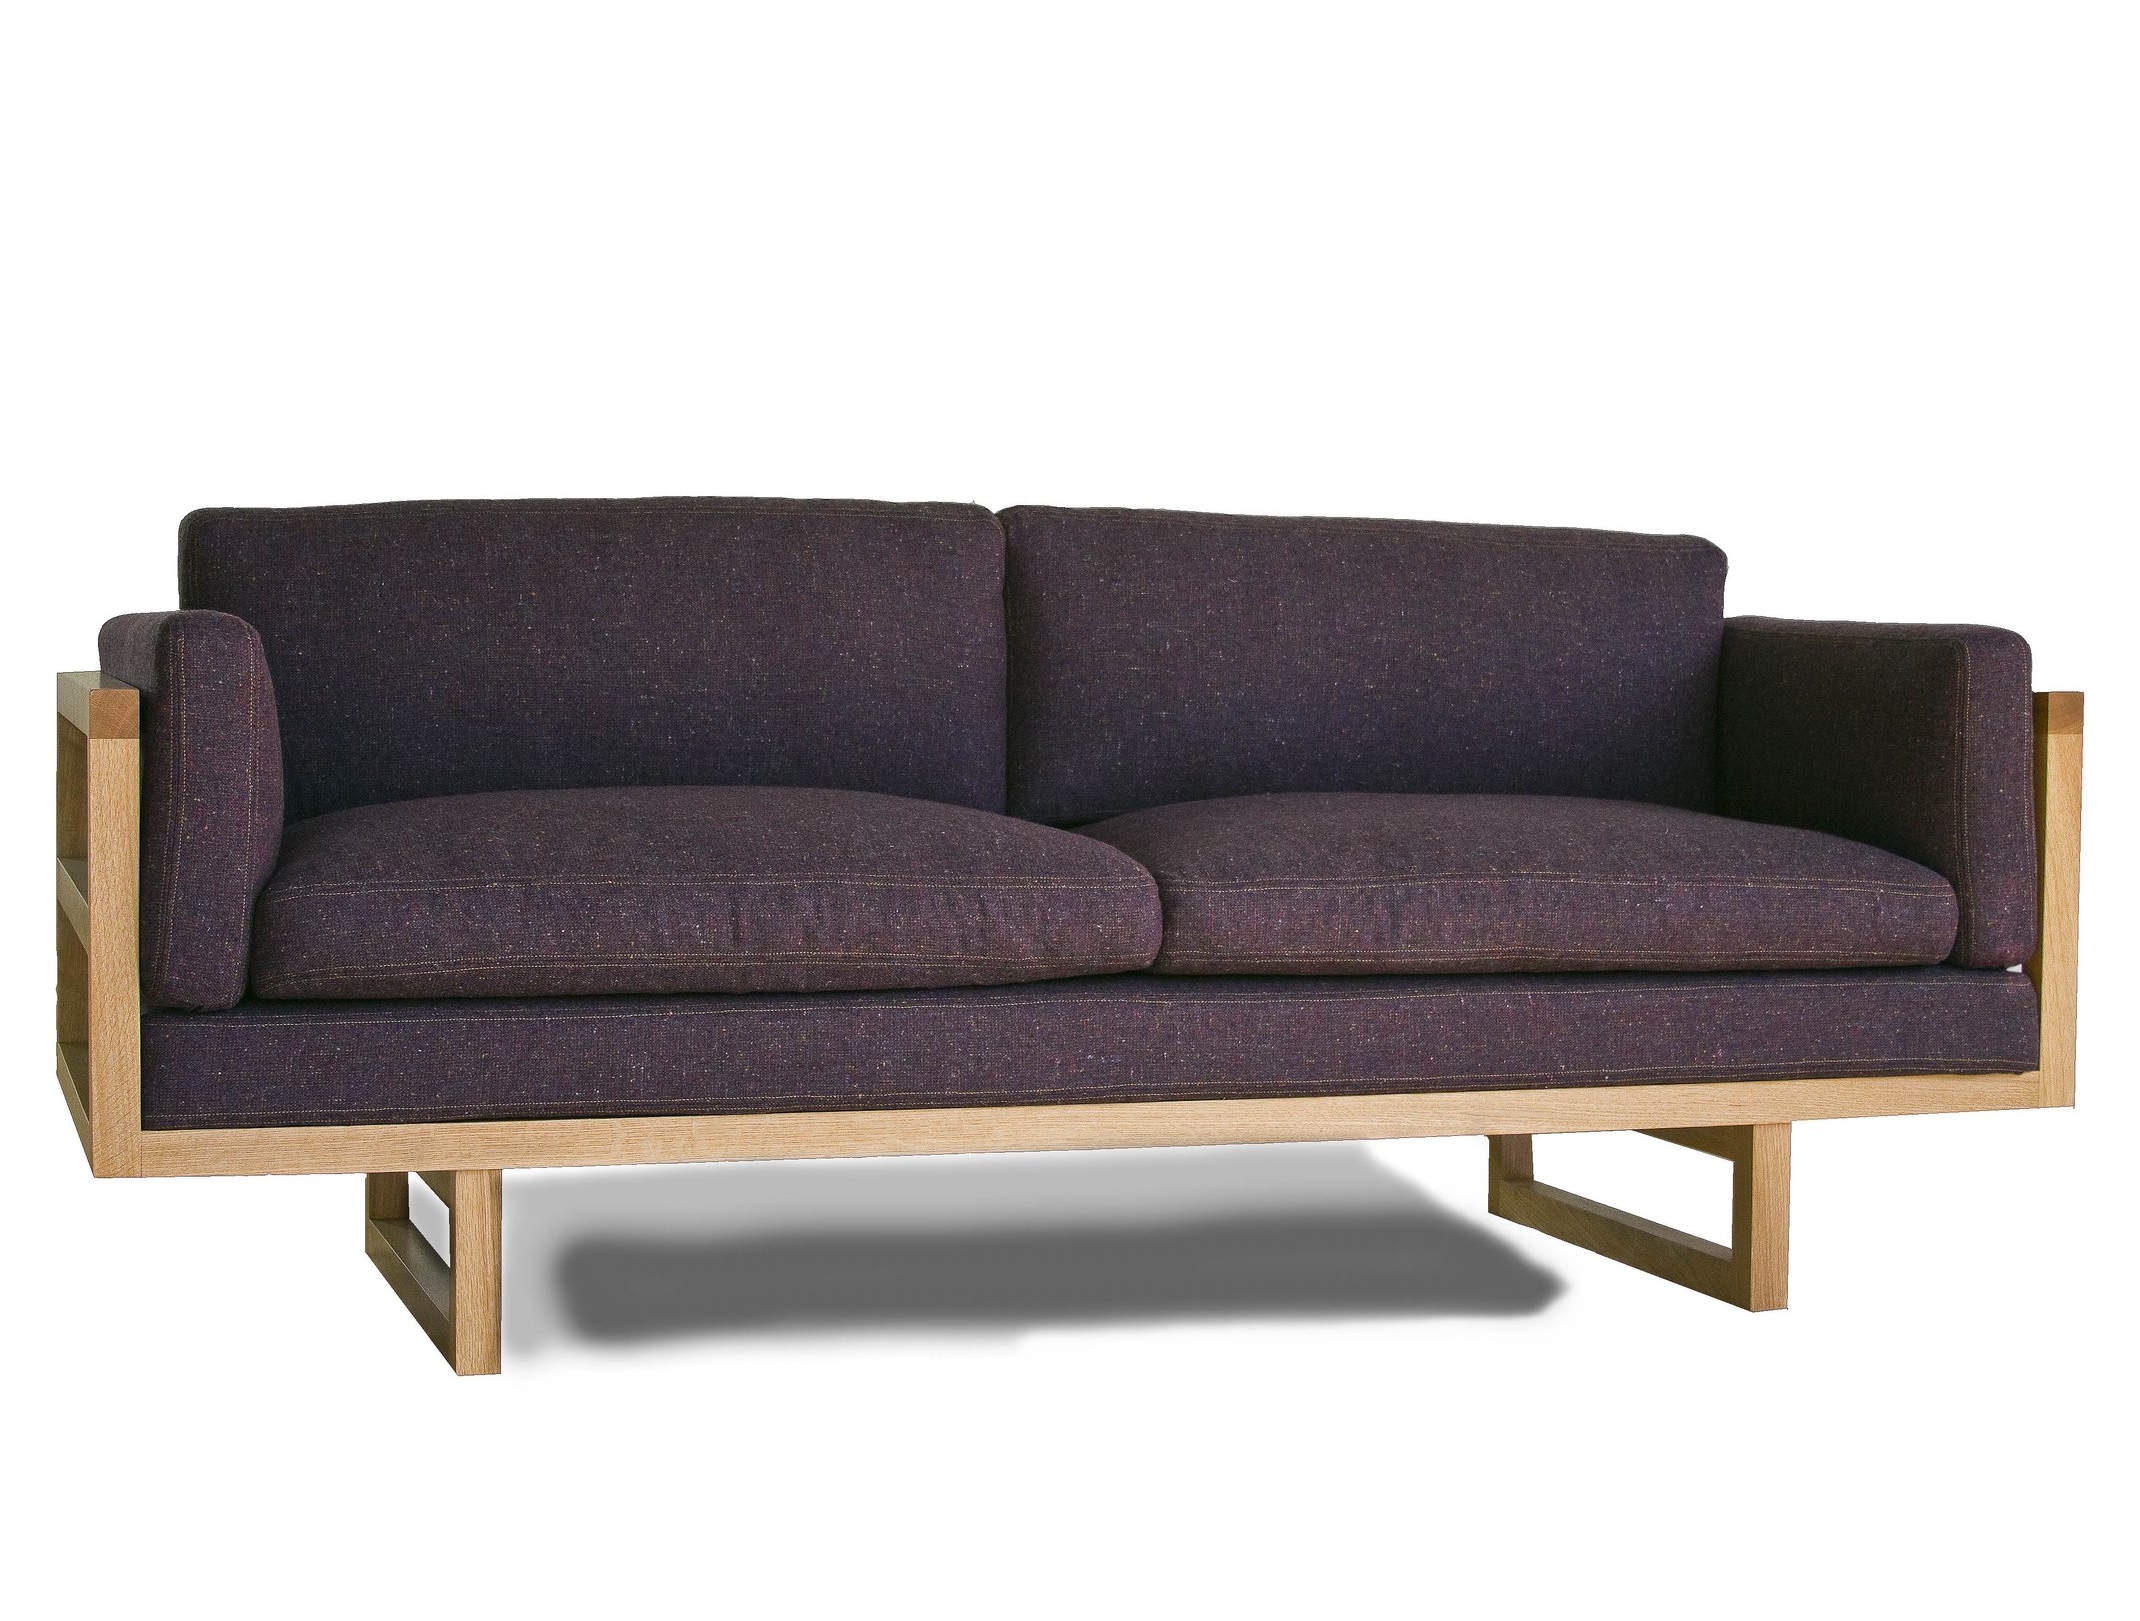 Oak-framed sofa by  O Driscoll Furniture, upholstered in Donegal Irish Tweed woven by Molloy & Sons.jpg